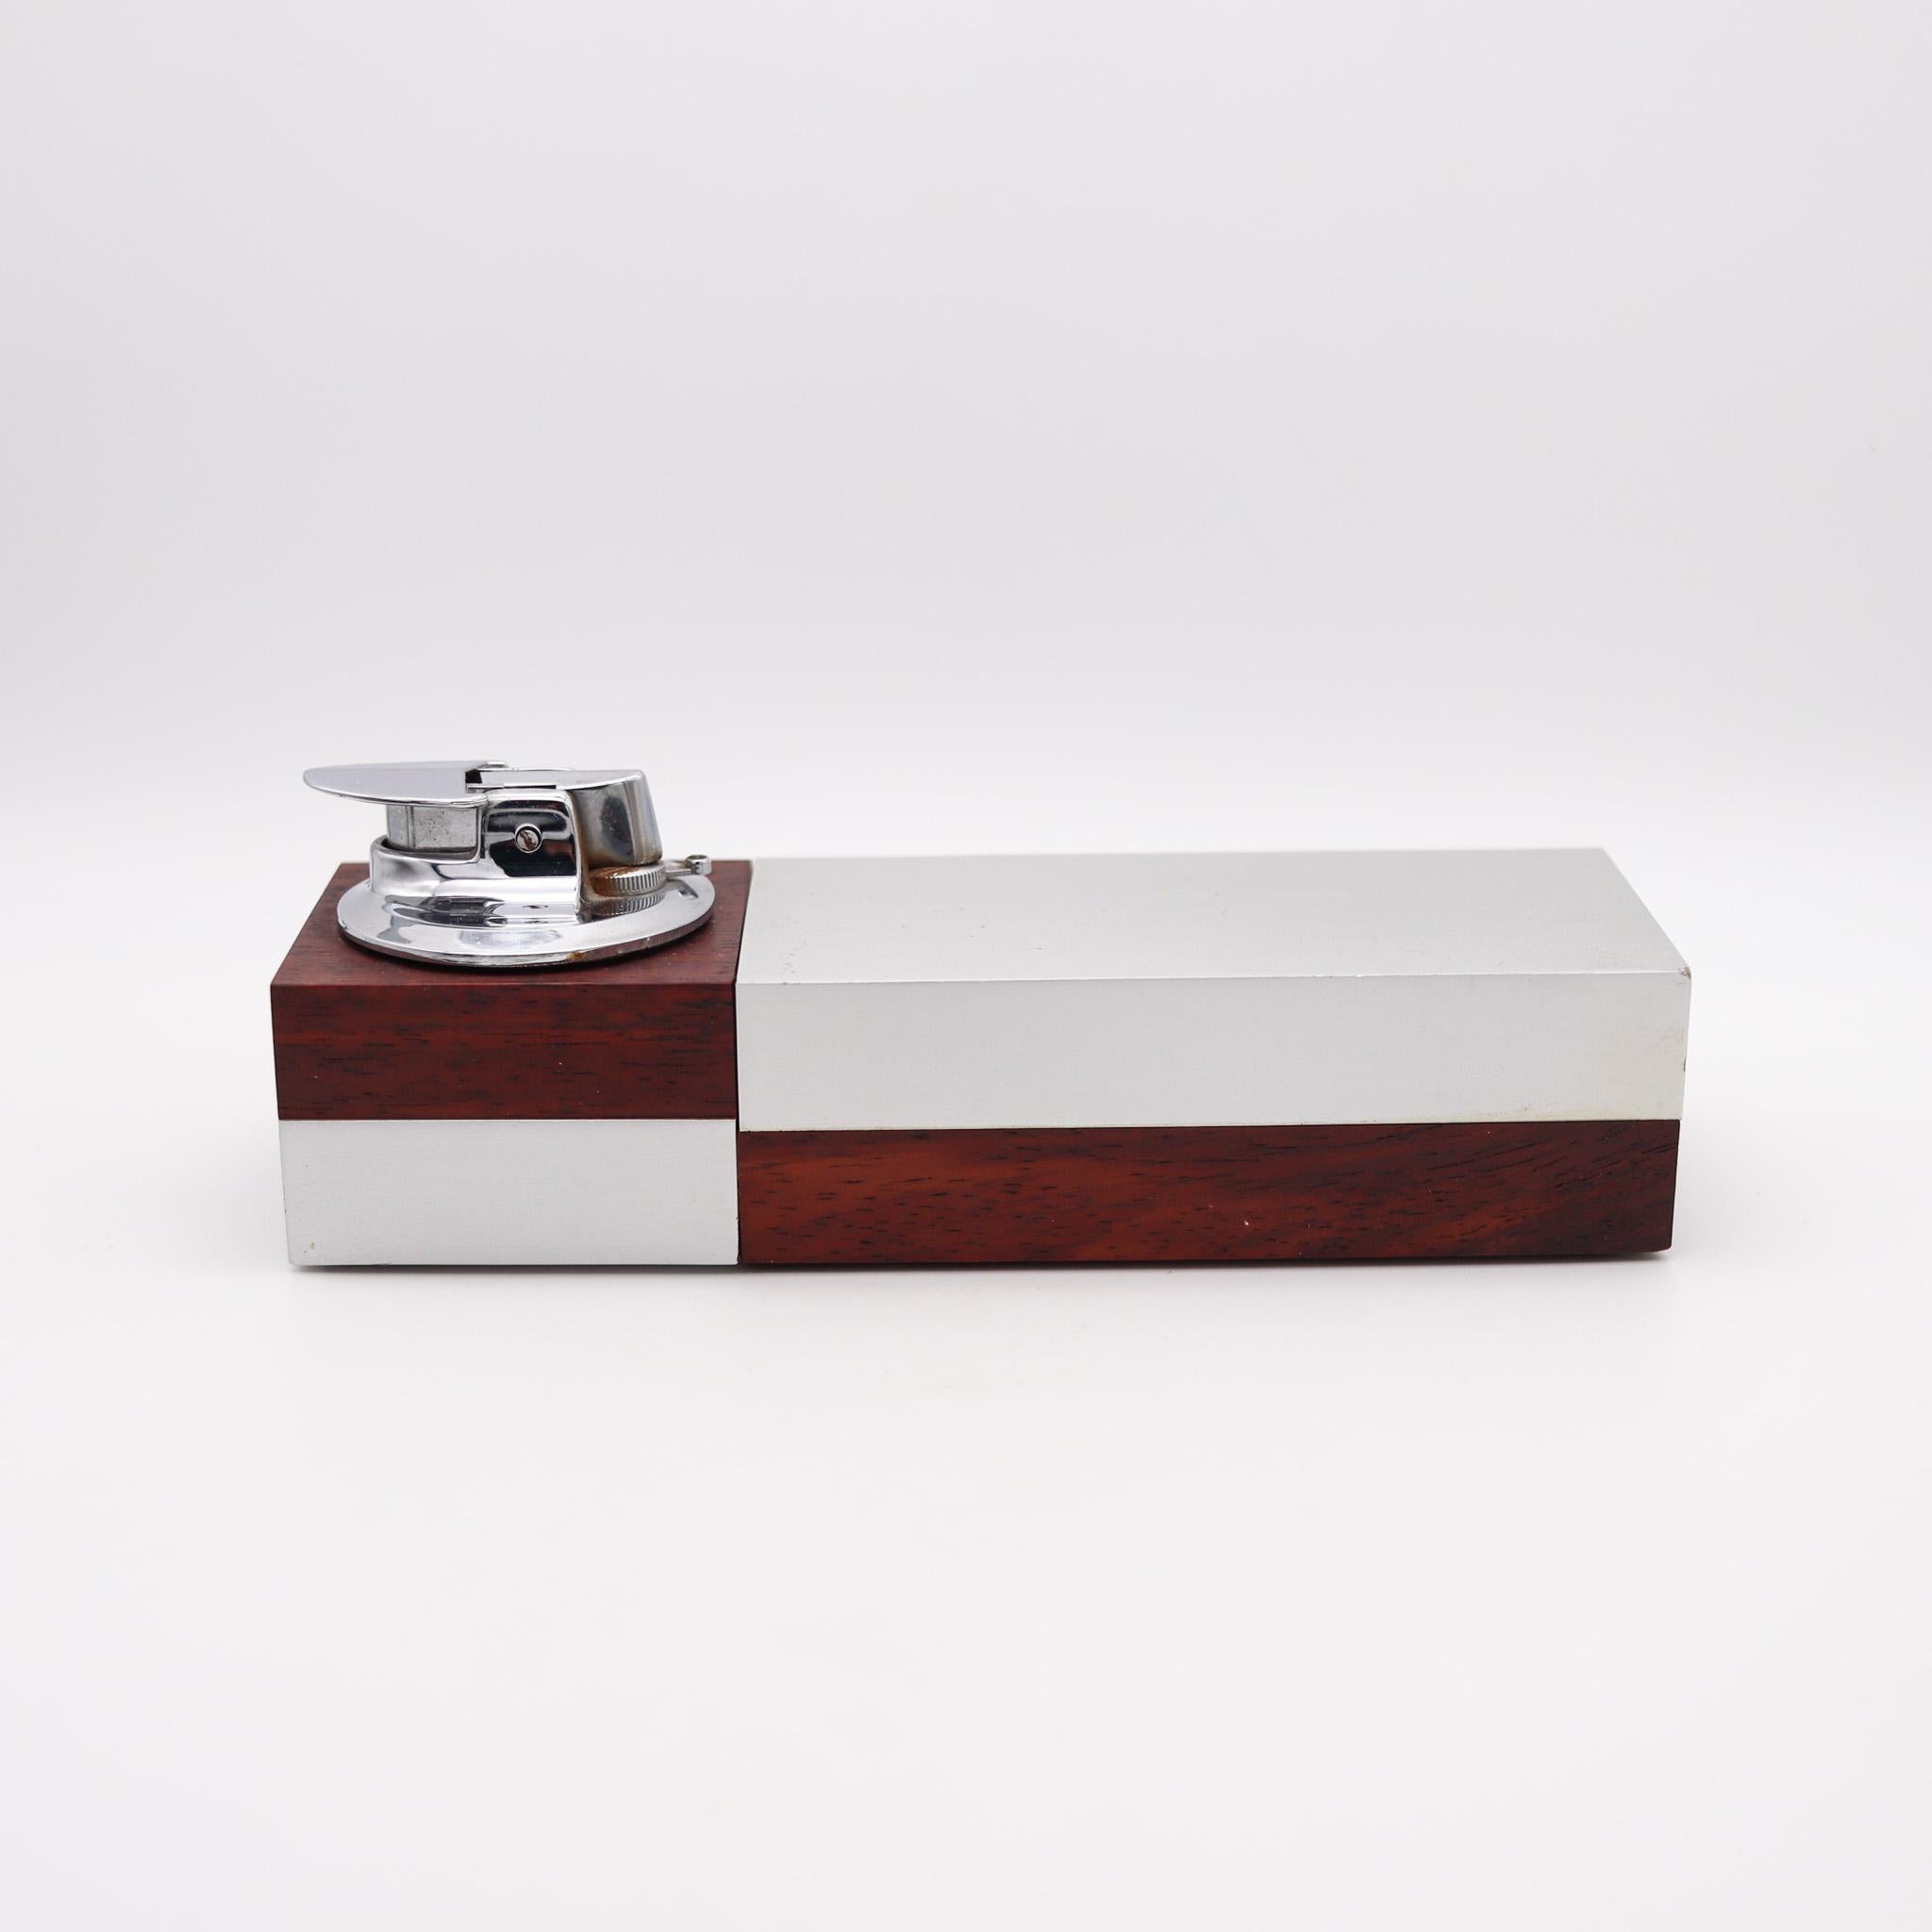 Modernist geometric cigarette box designed by Ronson.

An exceptional and very beautiful desk box, created in West Germany by The Ronson Co. for Scandia. This piece was made during the mid-century period, back in the 1960 and designed with geometric